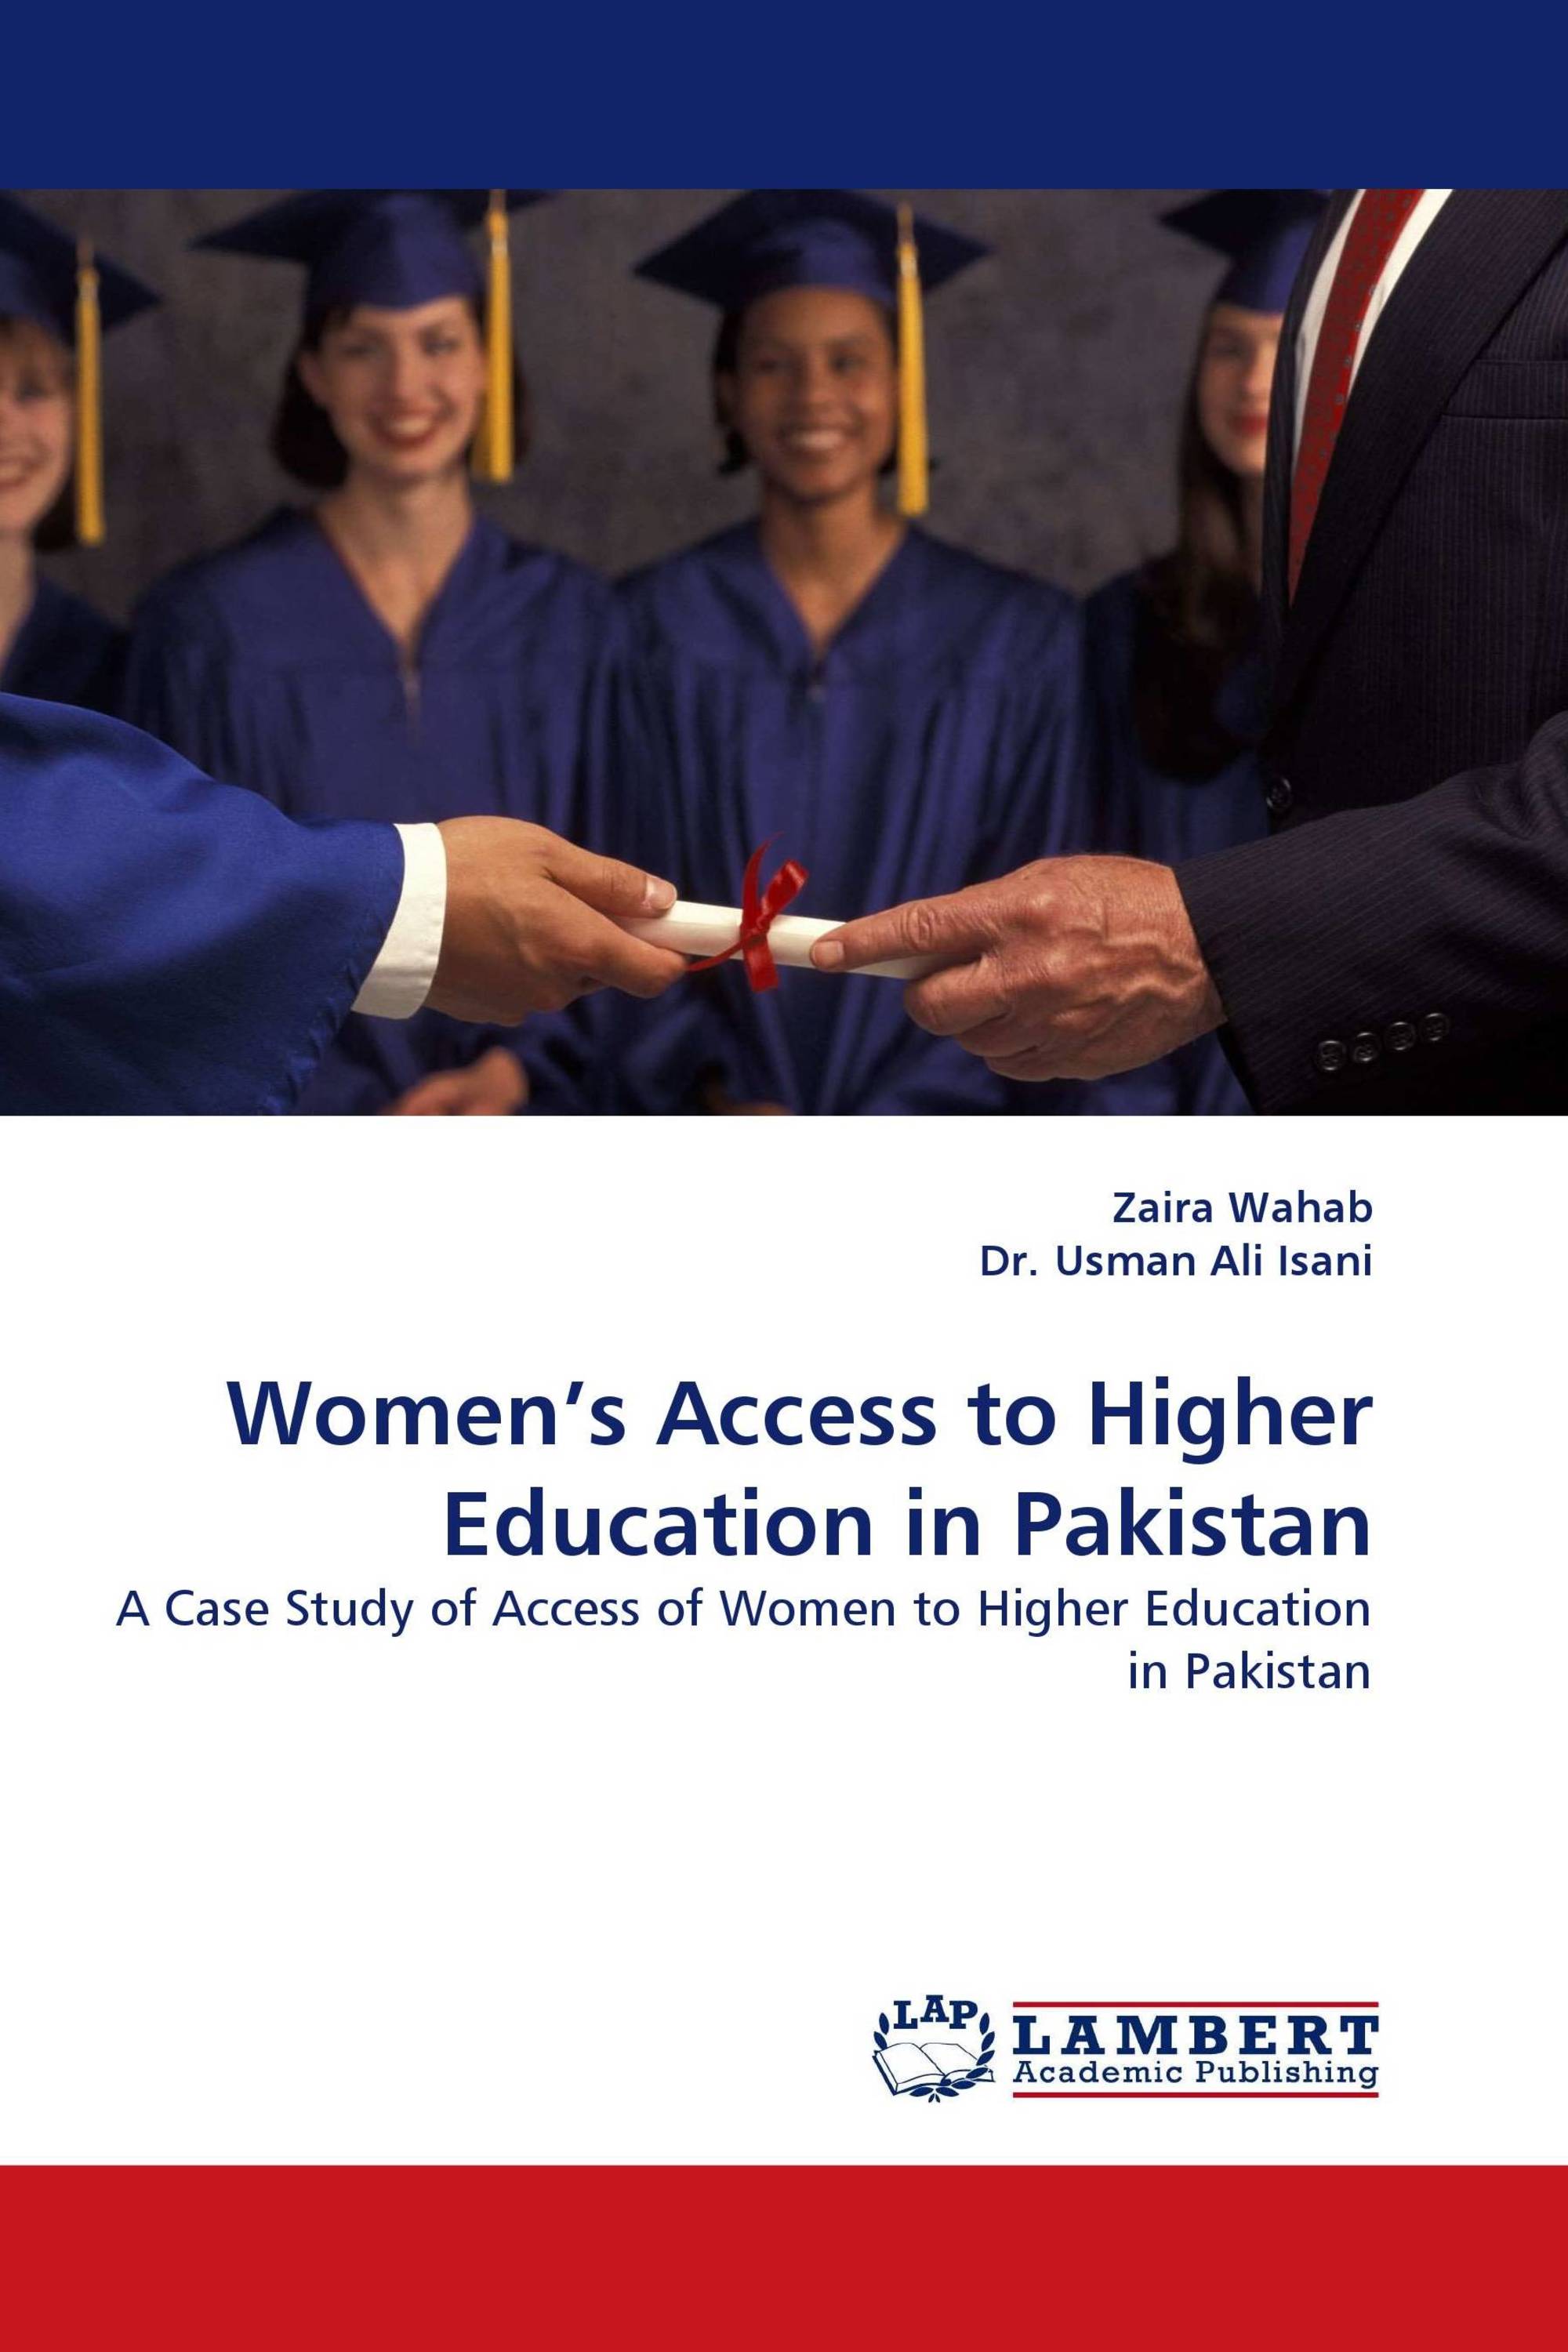 thesis on higher education in pakistan